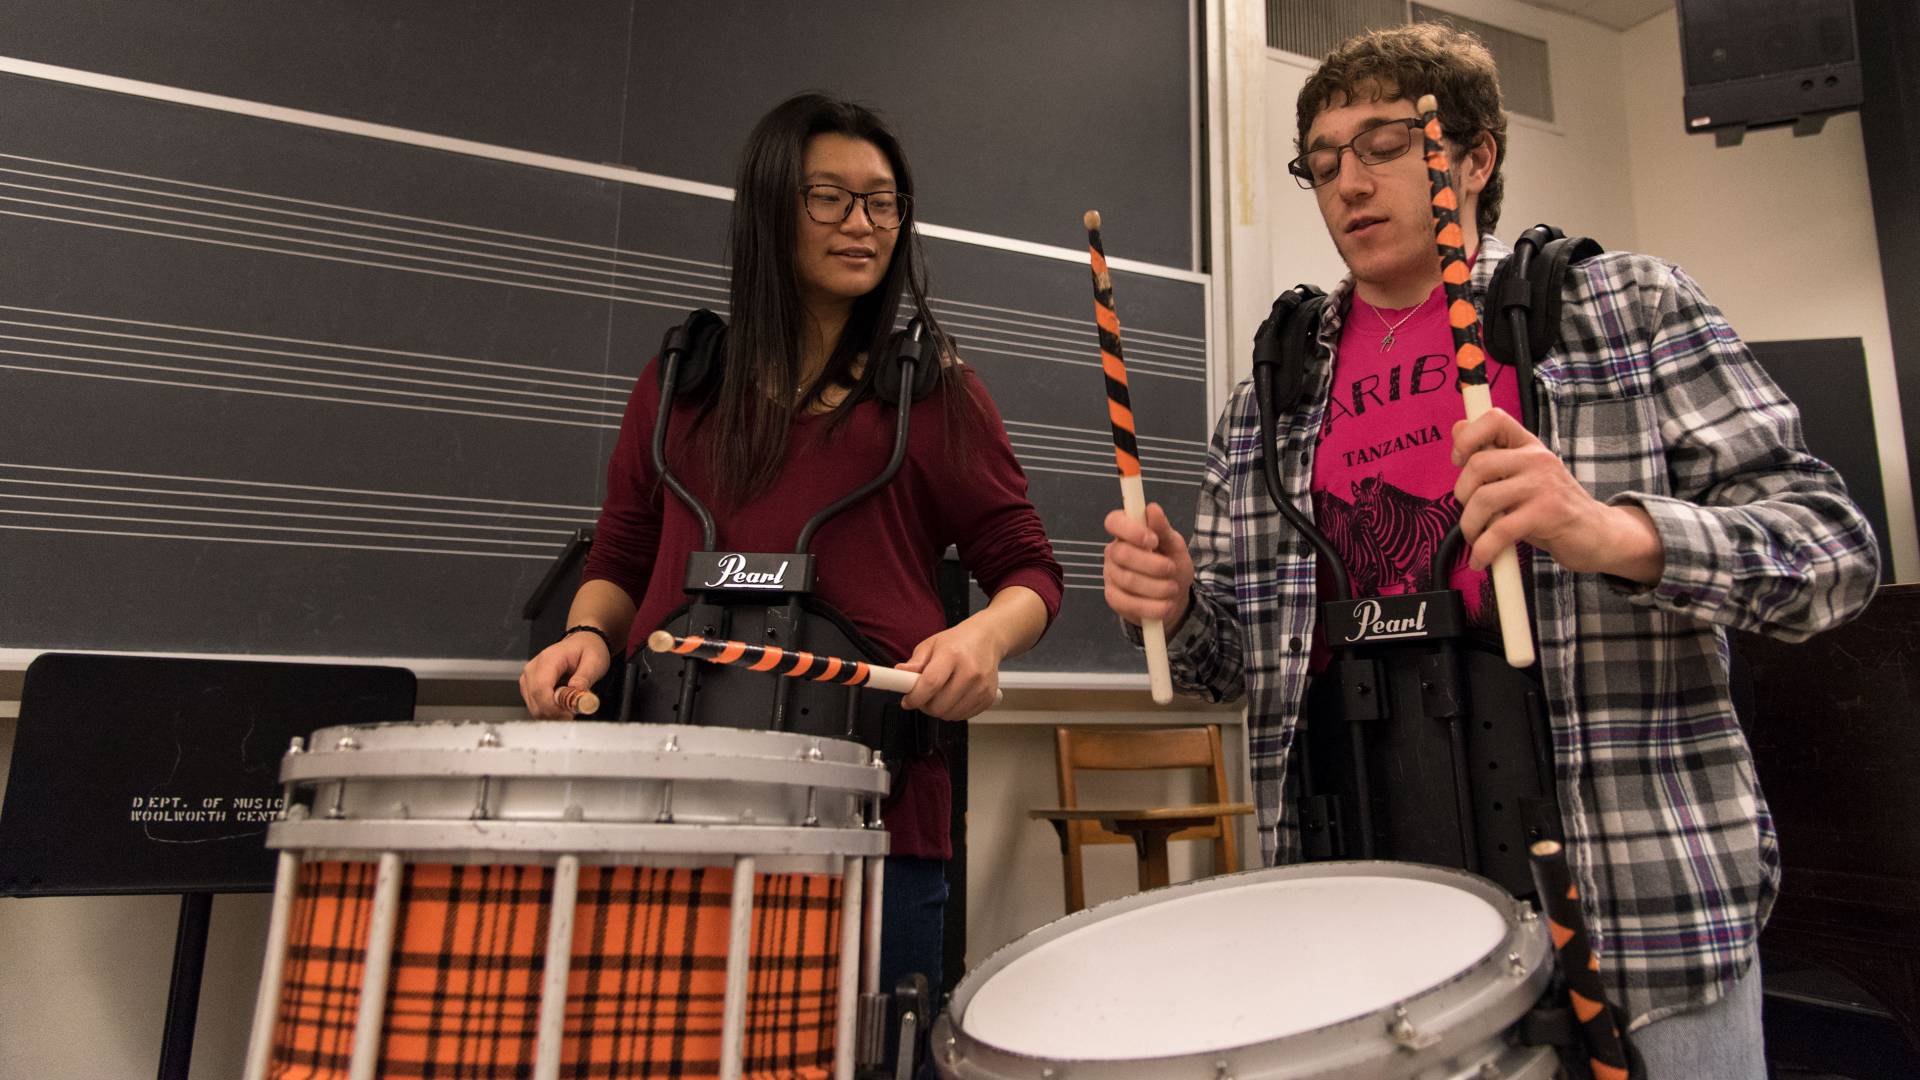 Student demonstrating drums to another student